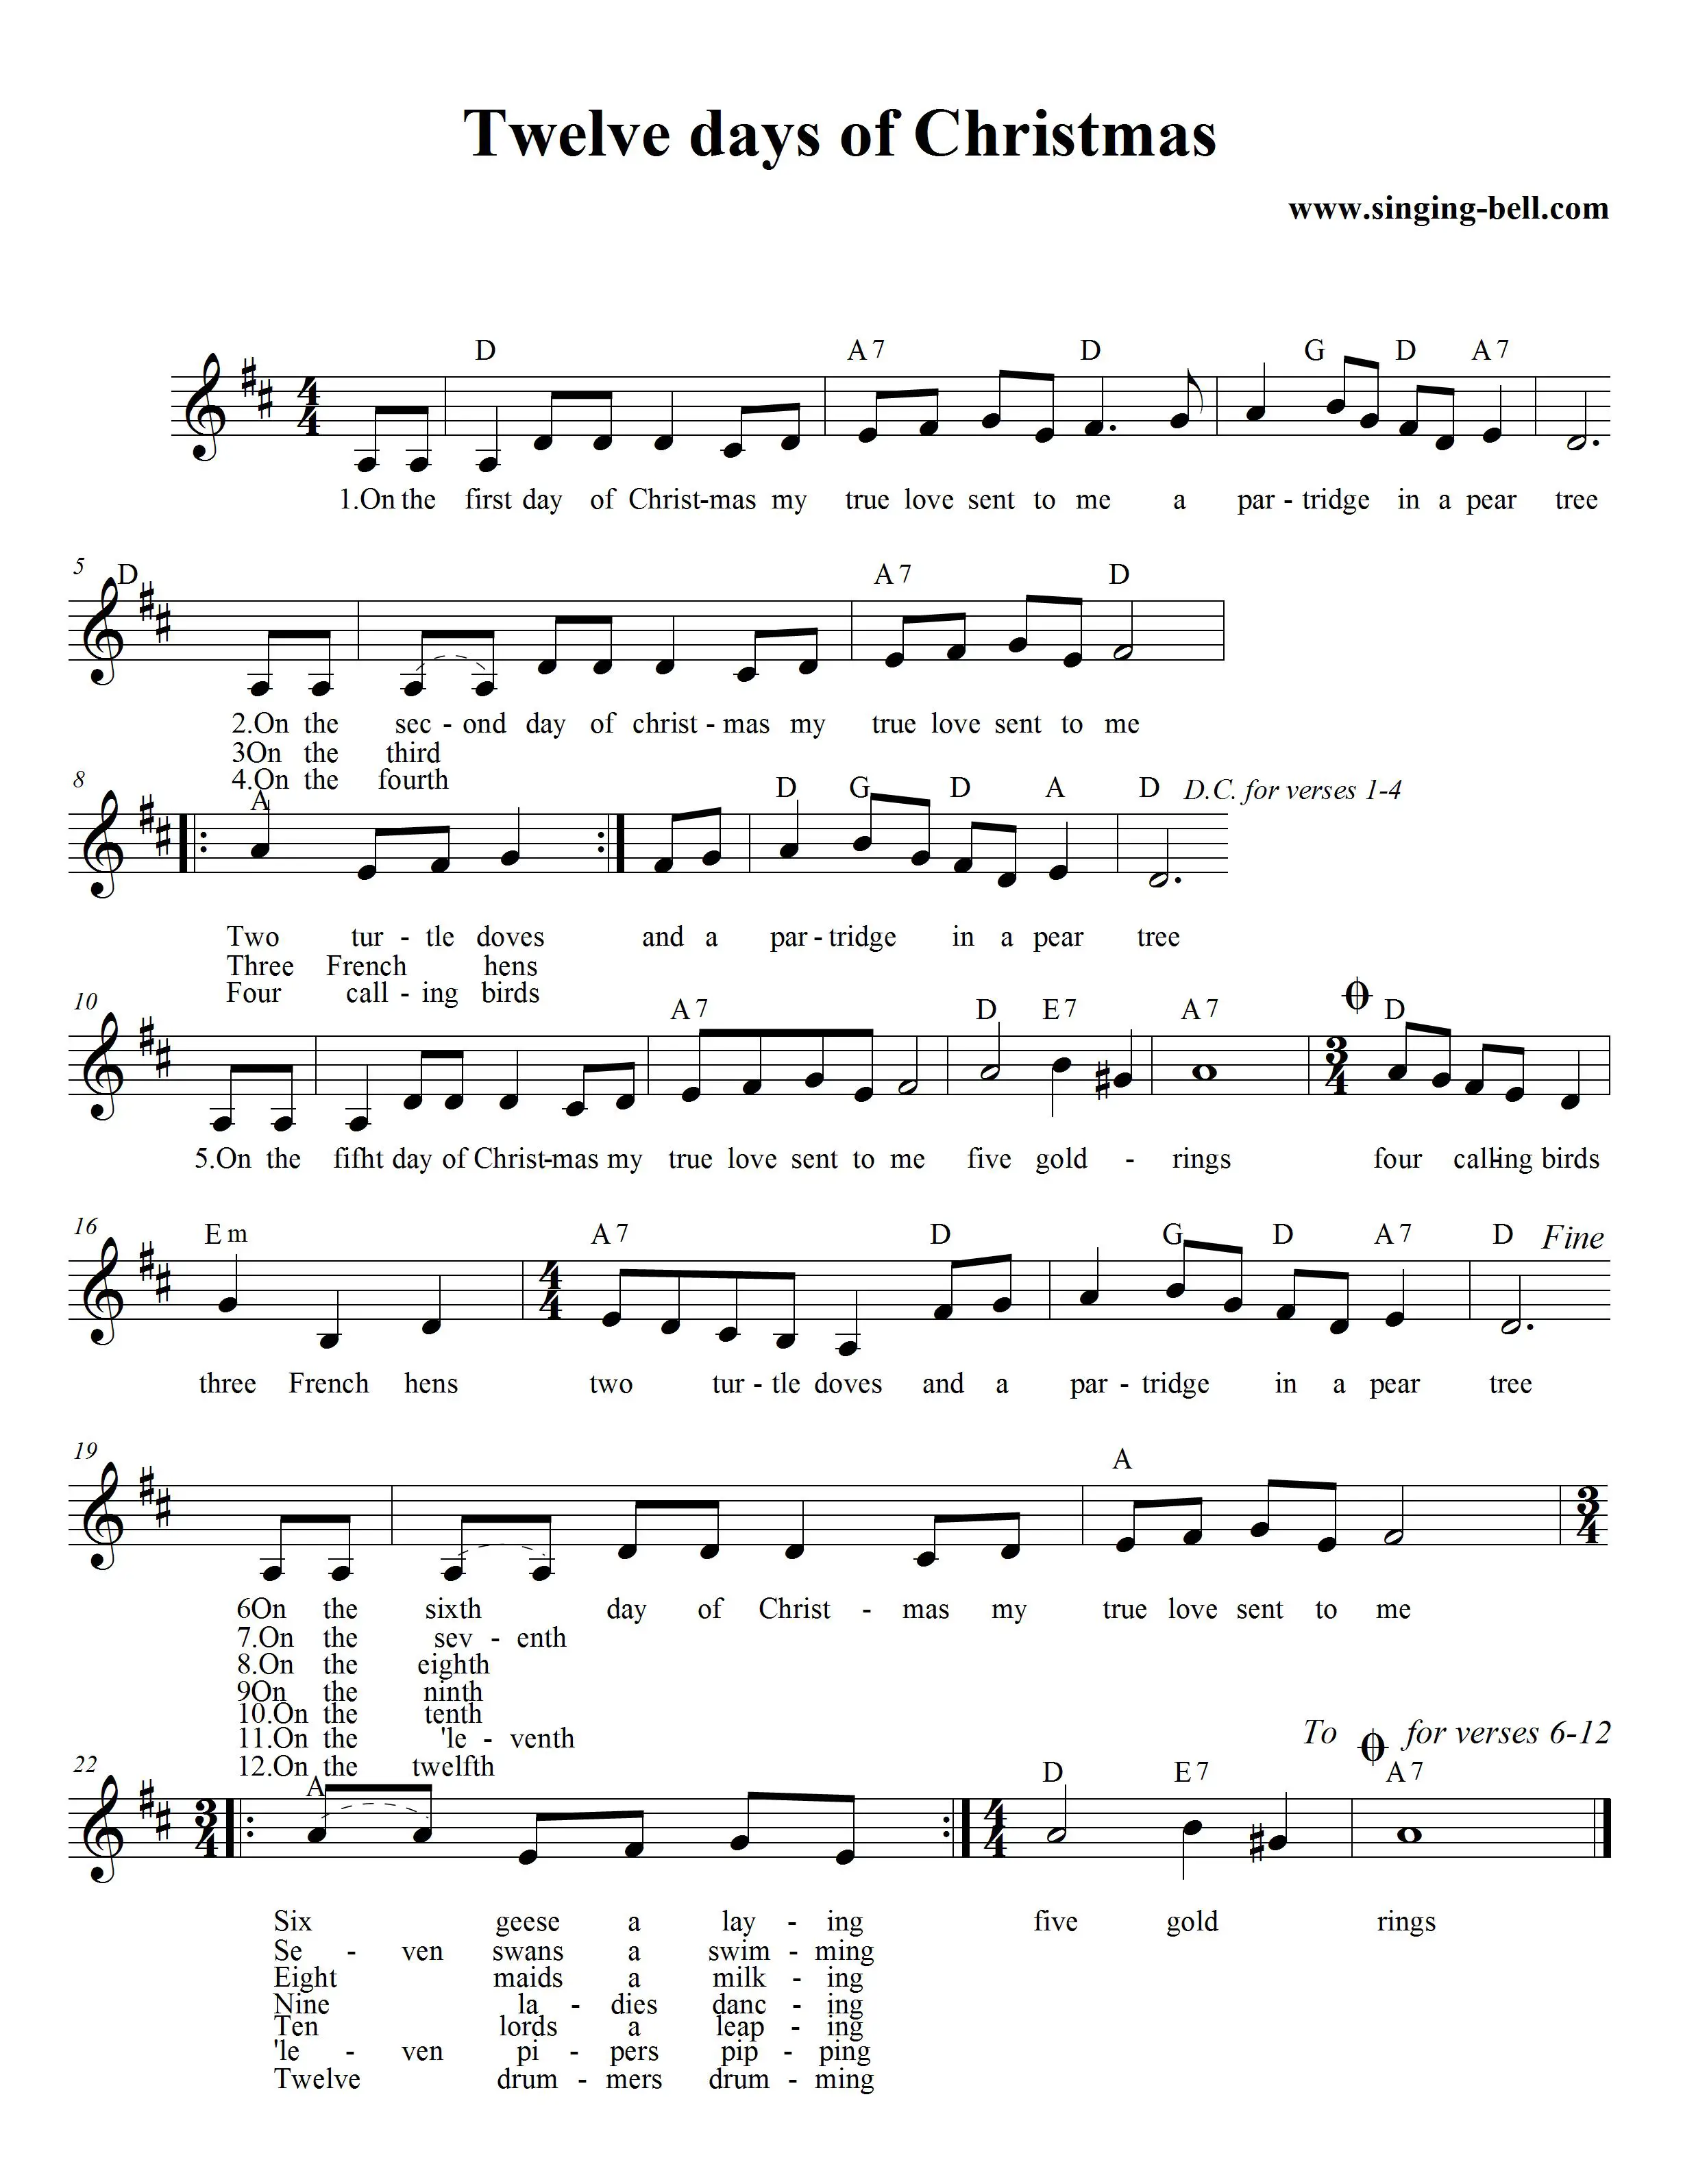 The 12 Days of Christmas - Free Christmas Music Score download